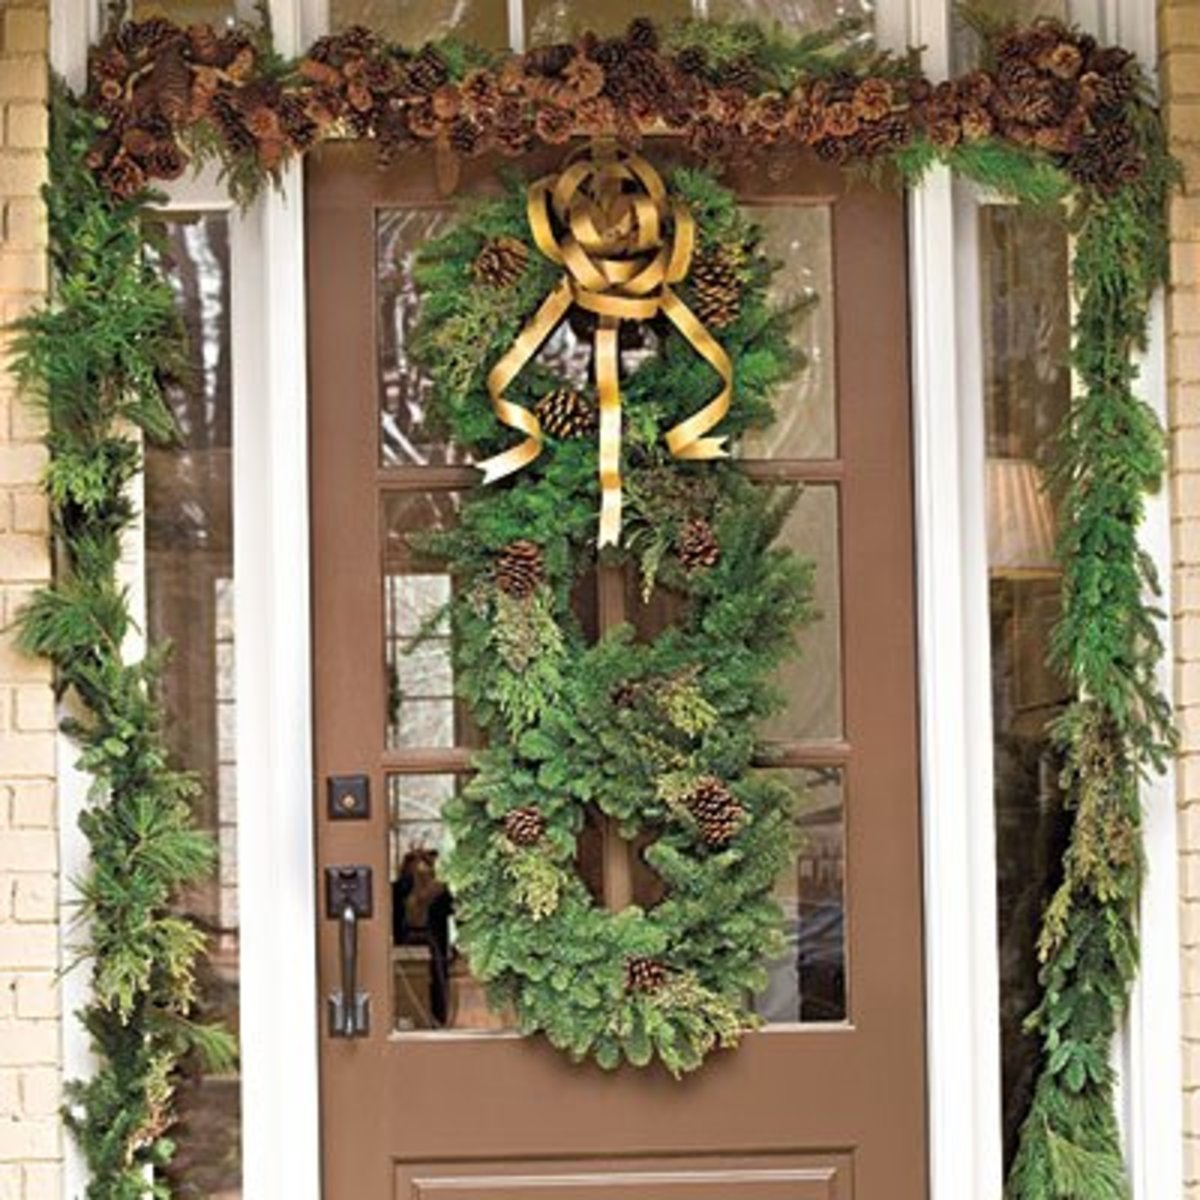 10-ways-to-decorate-evergreen-wreaths-decoration-ideas-for-the-holidays